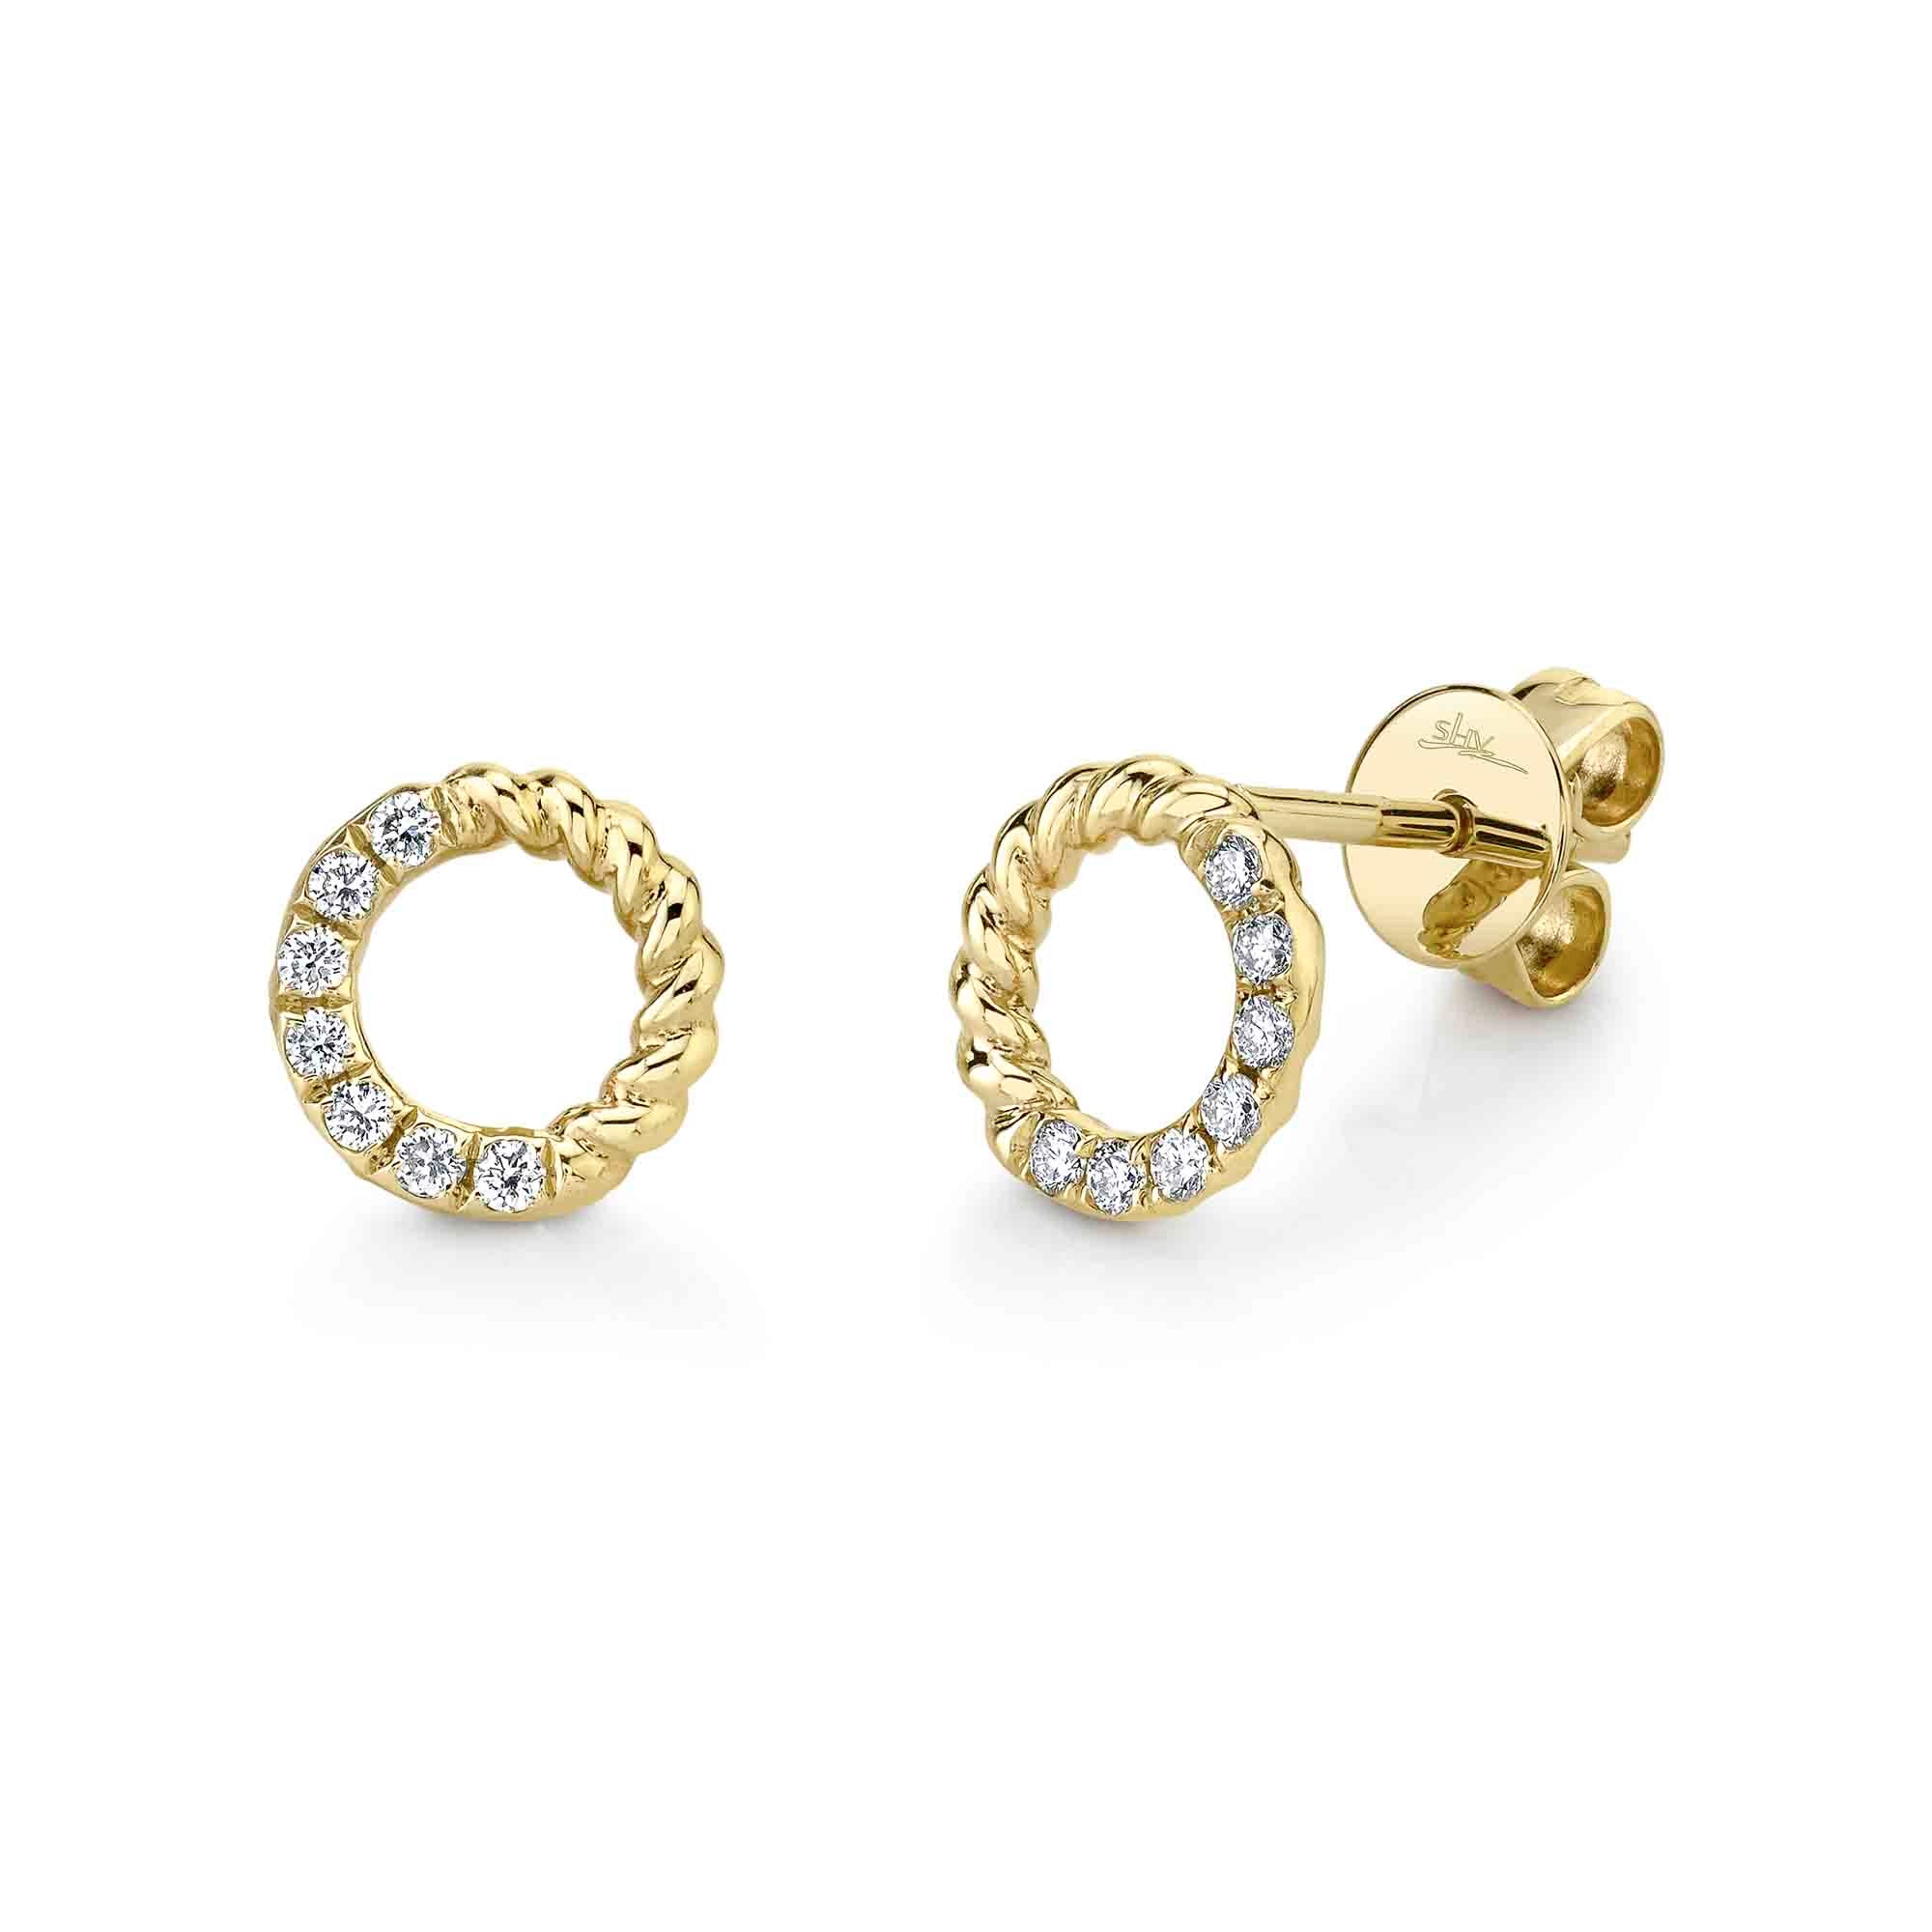 0.12ct Yellow Gold Diamond Pave Circle Earrings Earrings Gift Giving